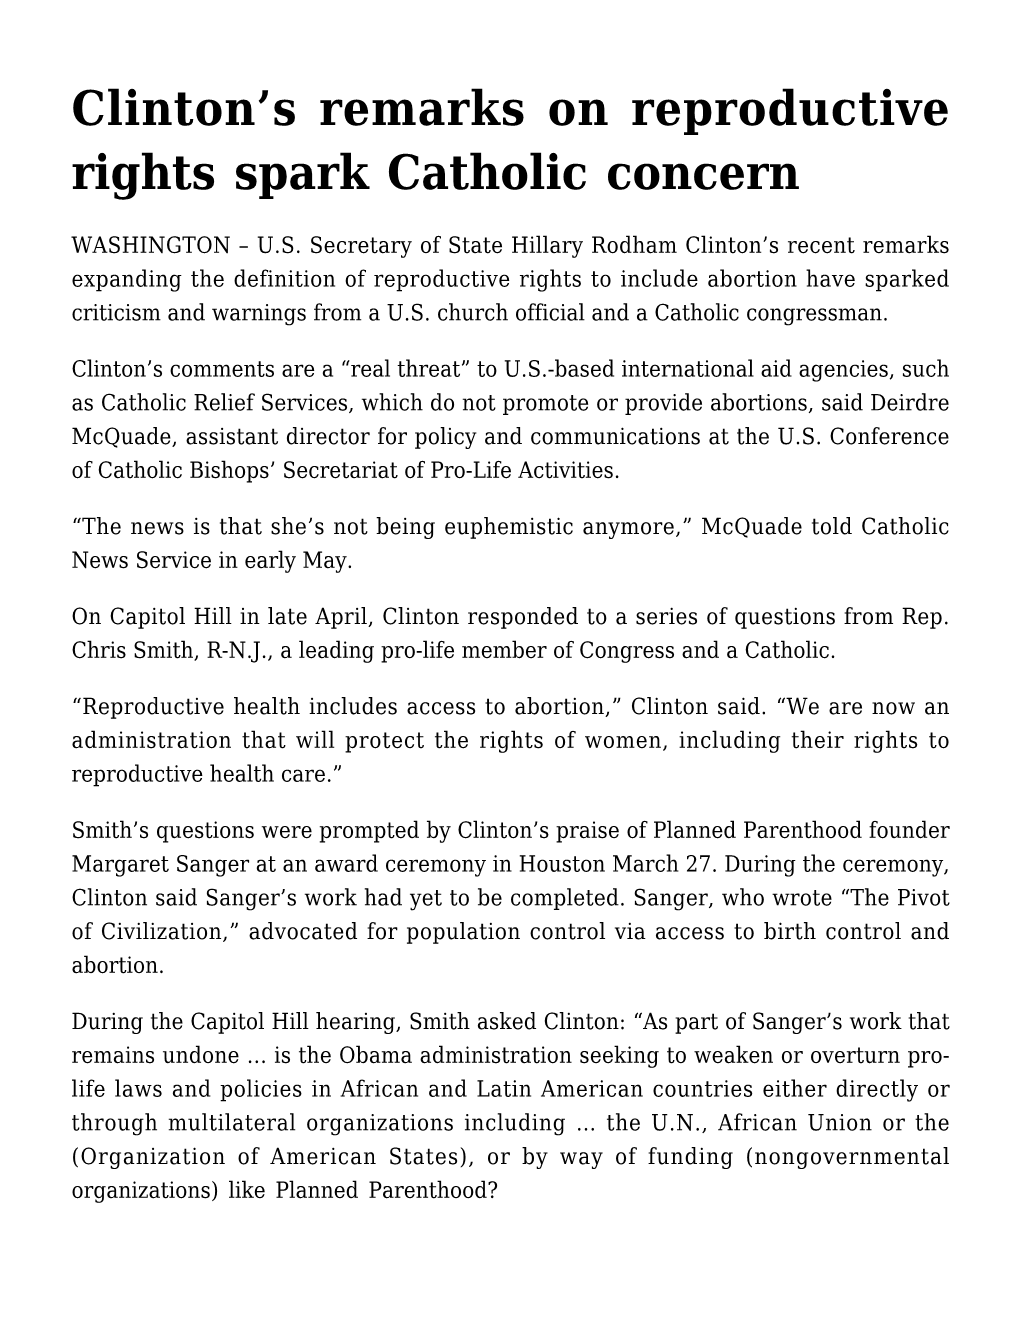 Clinton's Remarks on Reproductive Rights Spark Catholic Concern